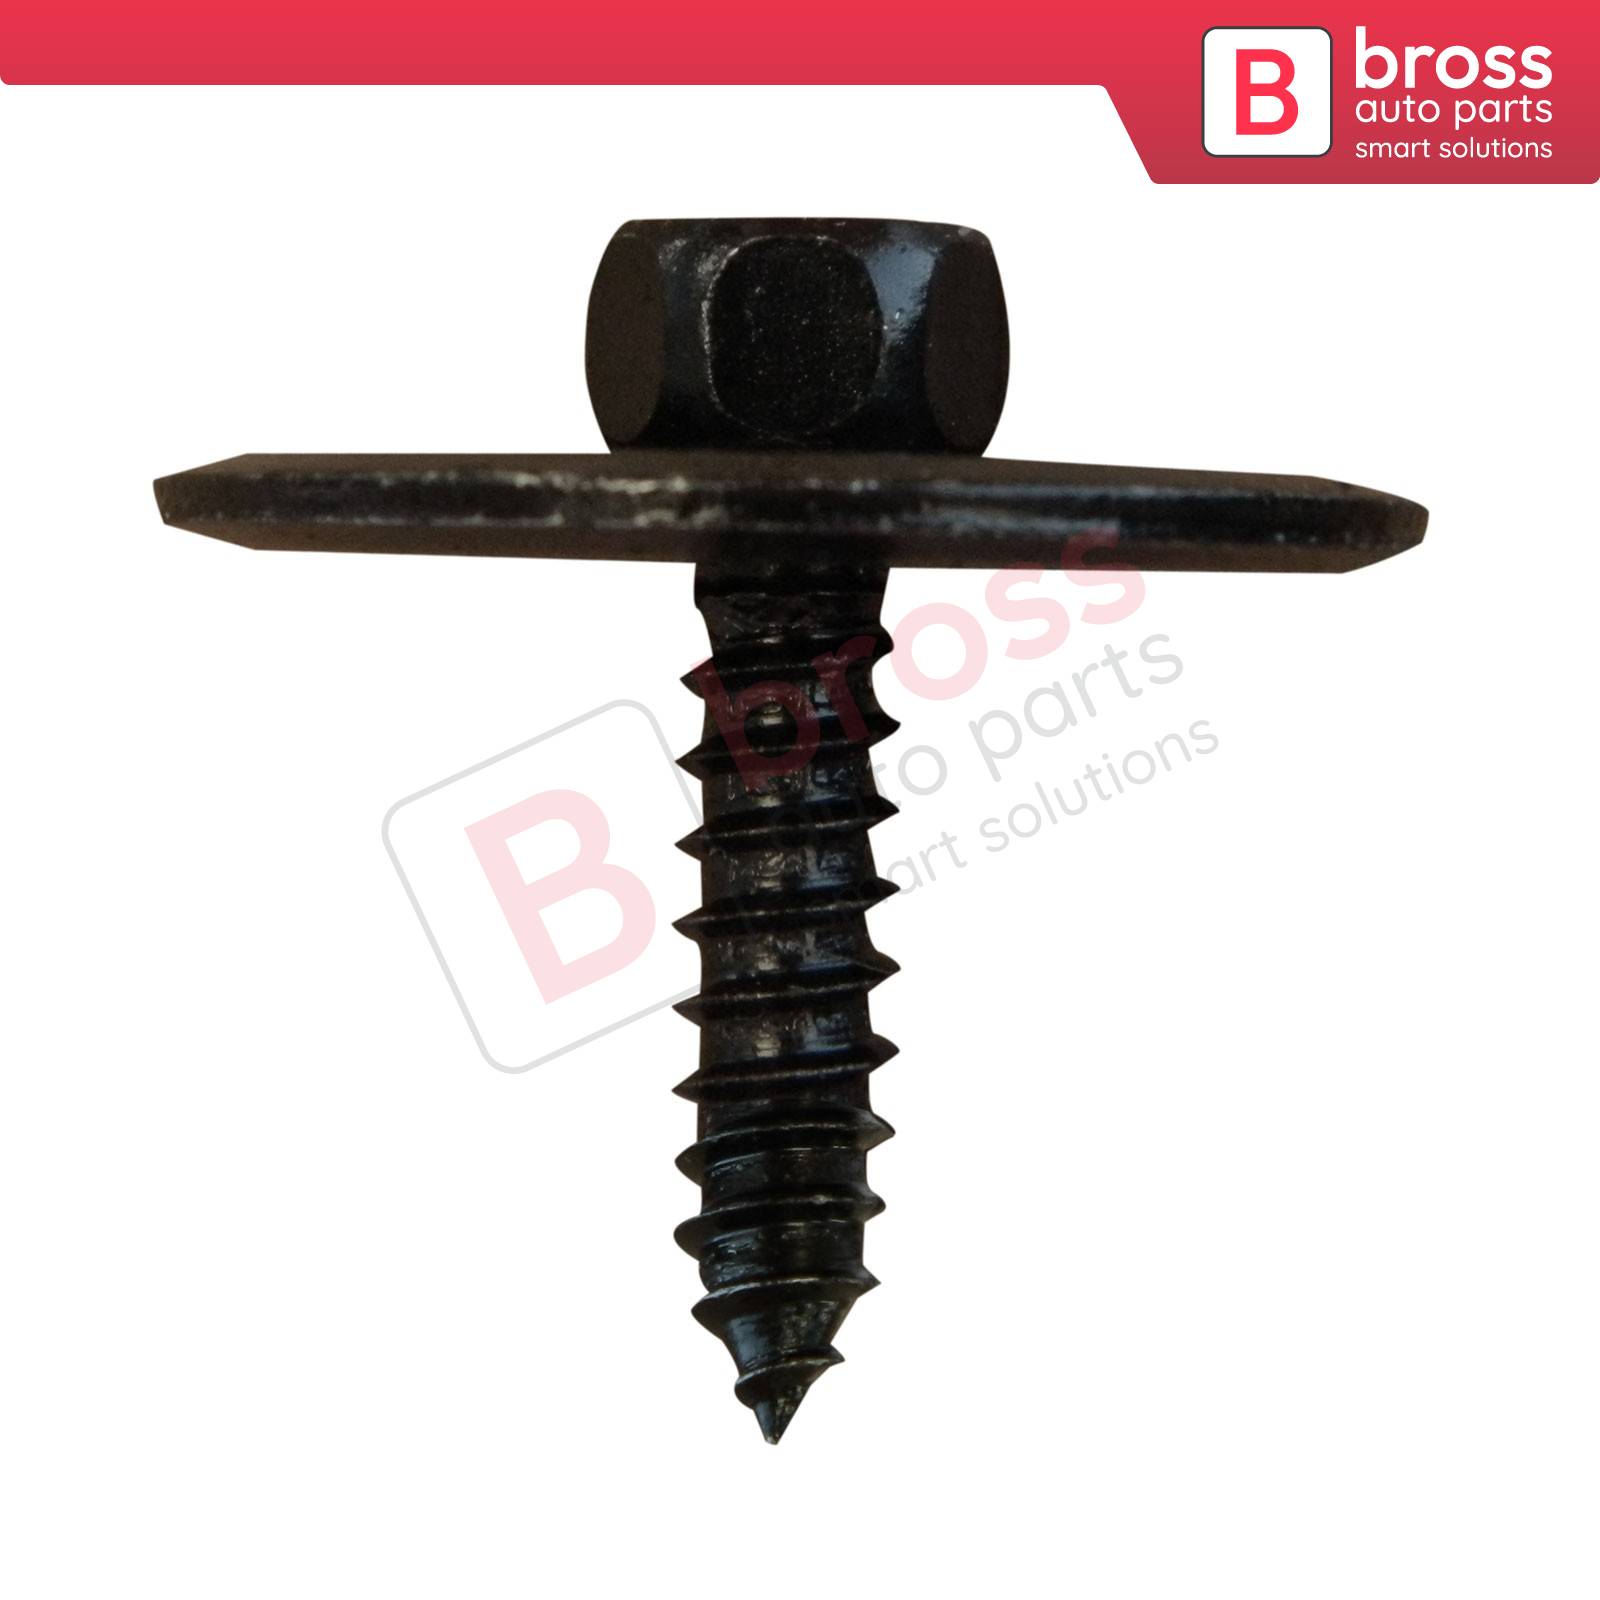 Bross Auto Parts - BCF2441 10 Pieces Screw with washer Black for Mercedes  2019900536